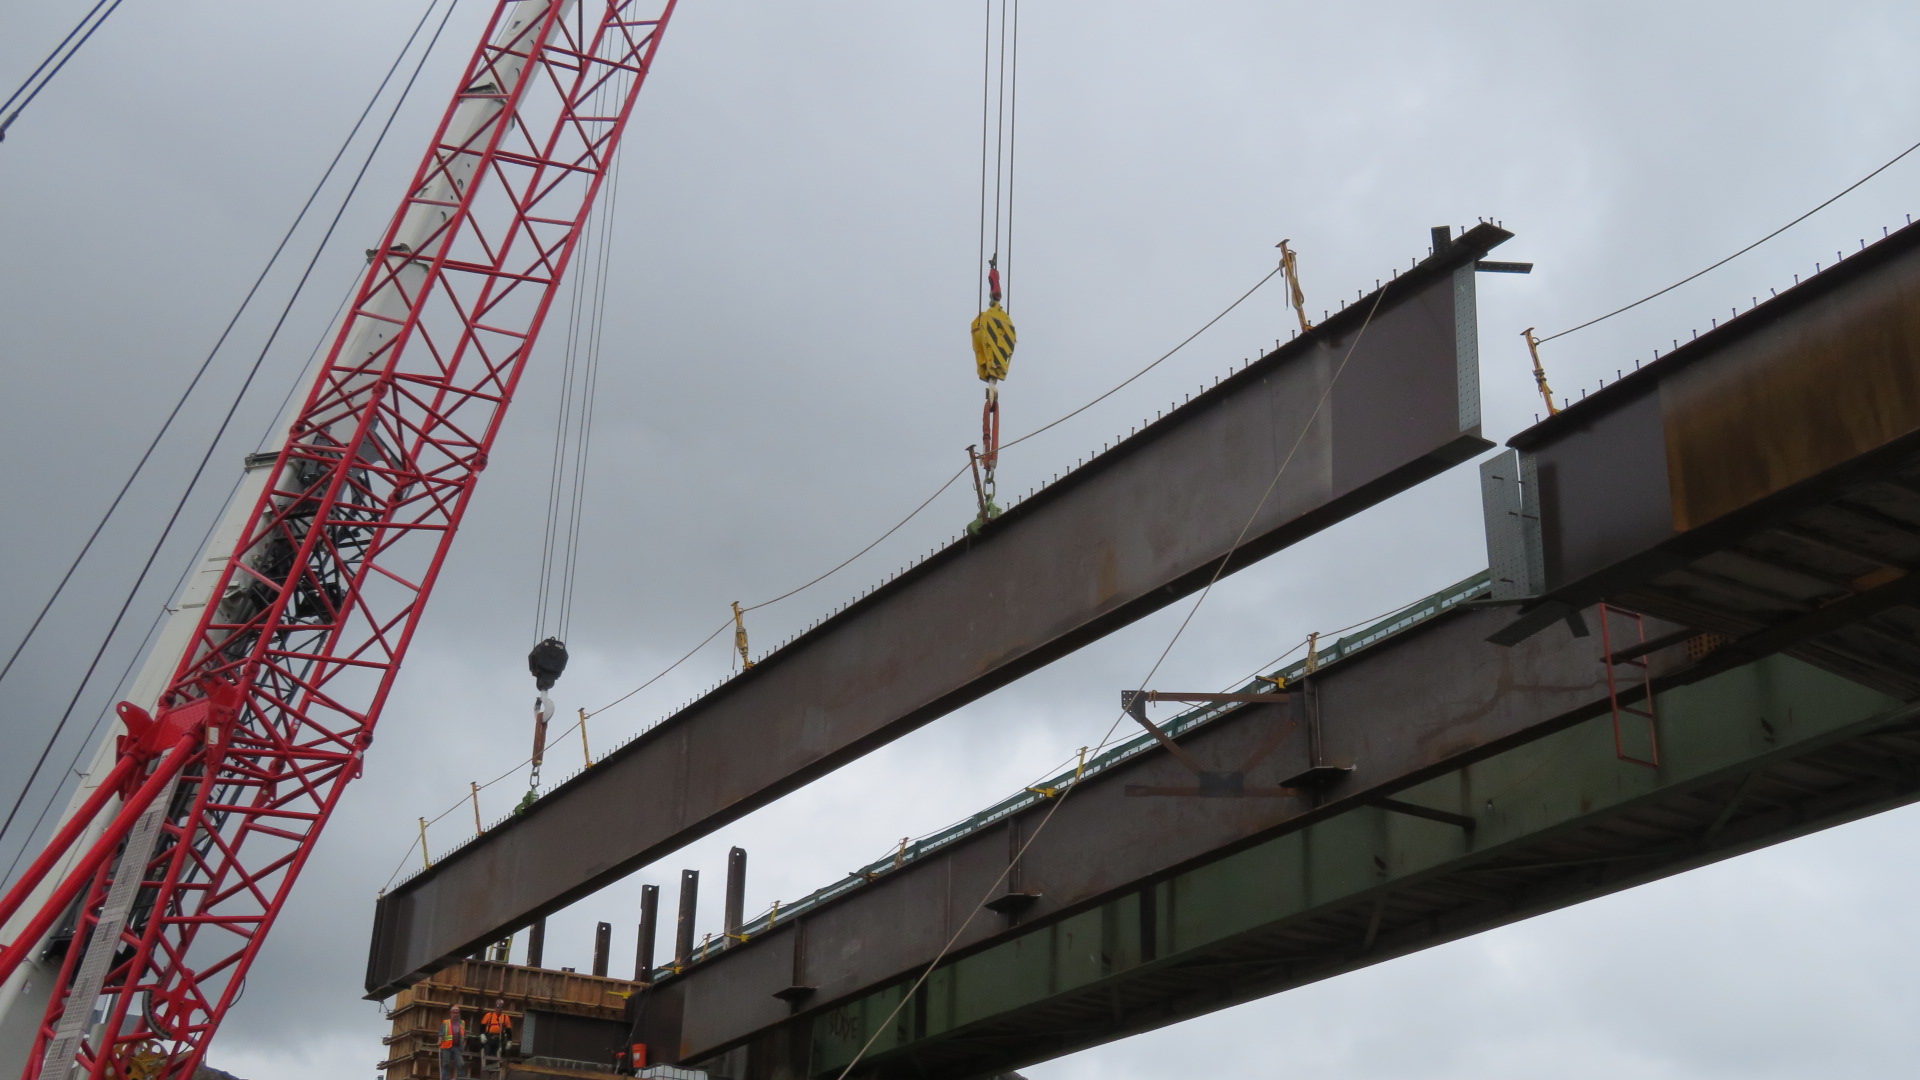 Lifting the girder to be lowered into place